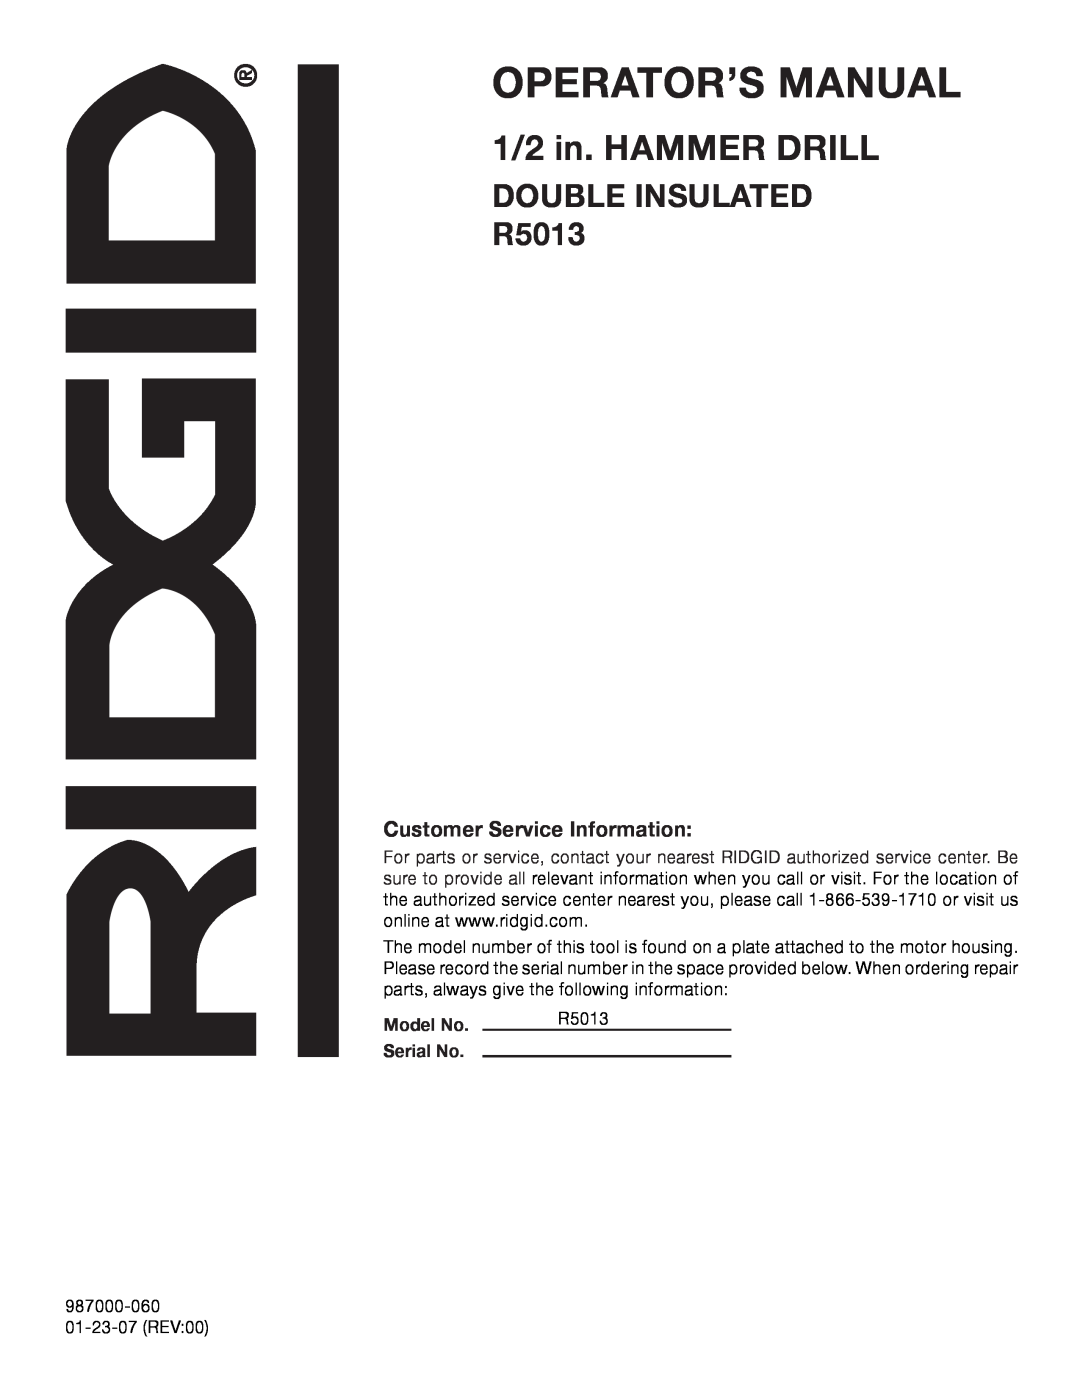 RIDGID manual Operator’S Manual, 1/2 in. HAMMER DRILL, DOUBLE INSULATED R5013, Customer Service Information, Model No 